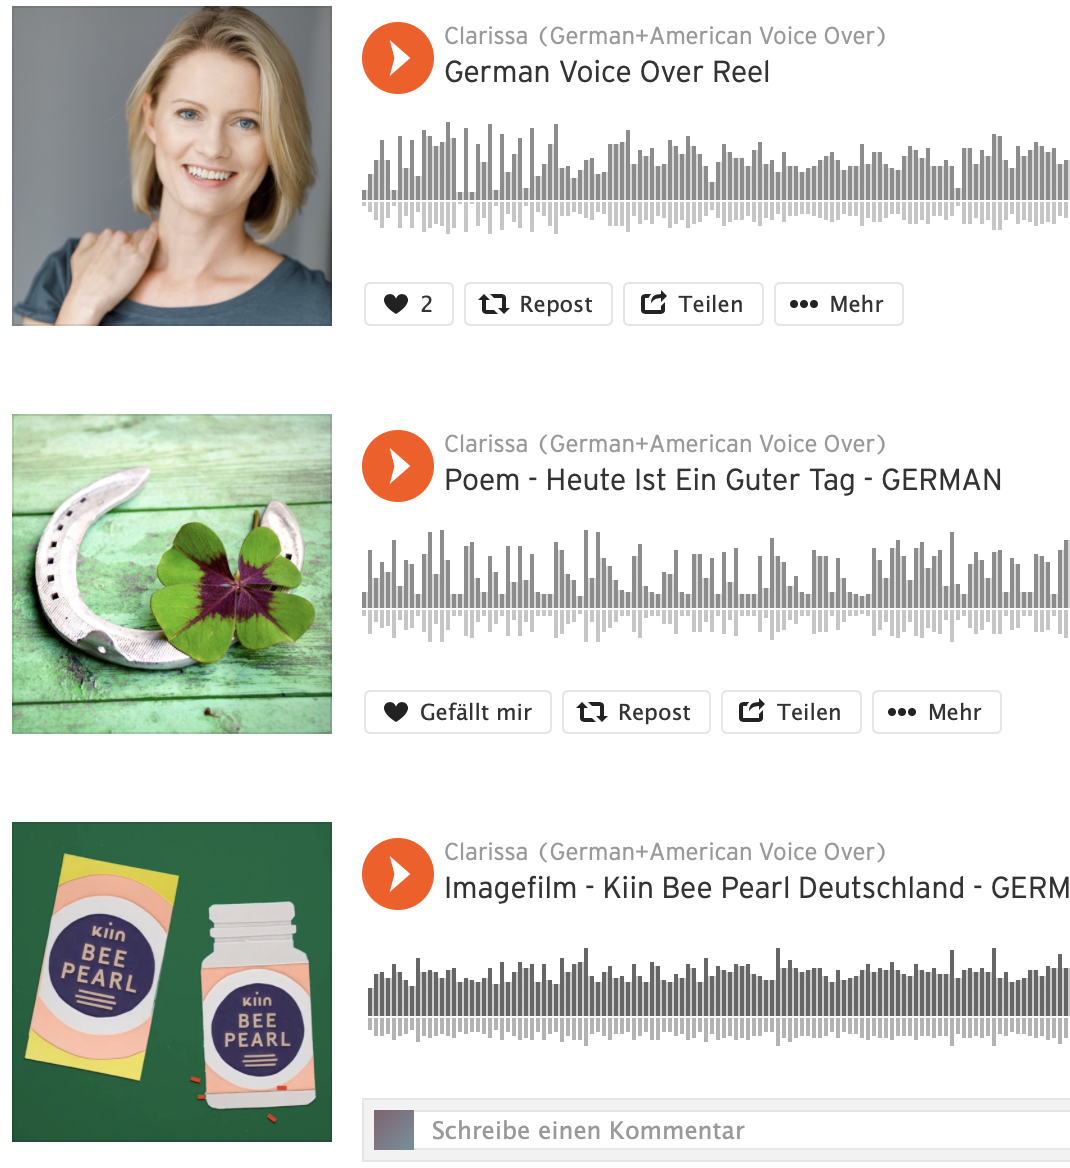 Check out my German + American Voice Over Samples on Soundcloud